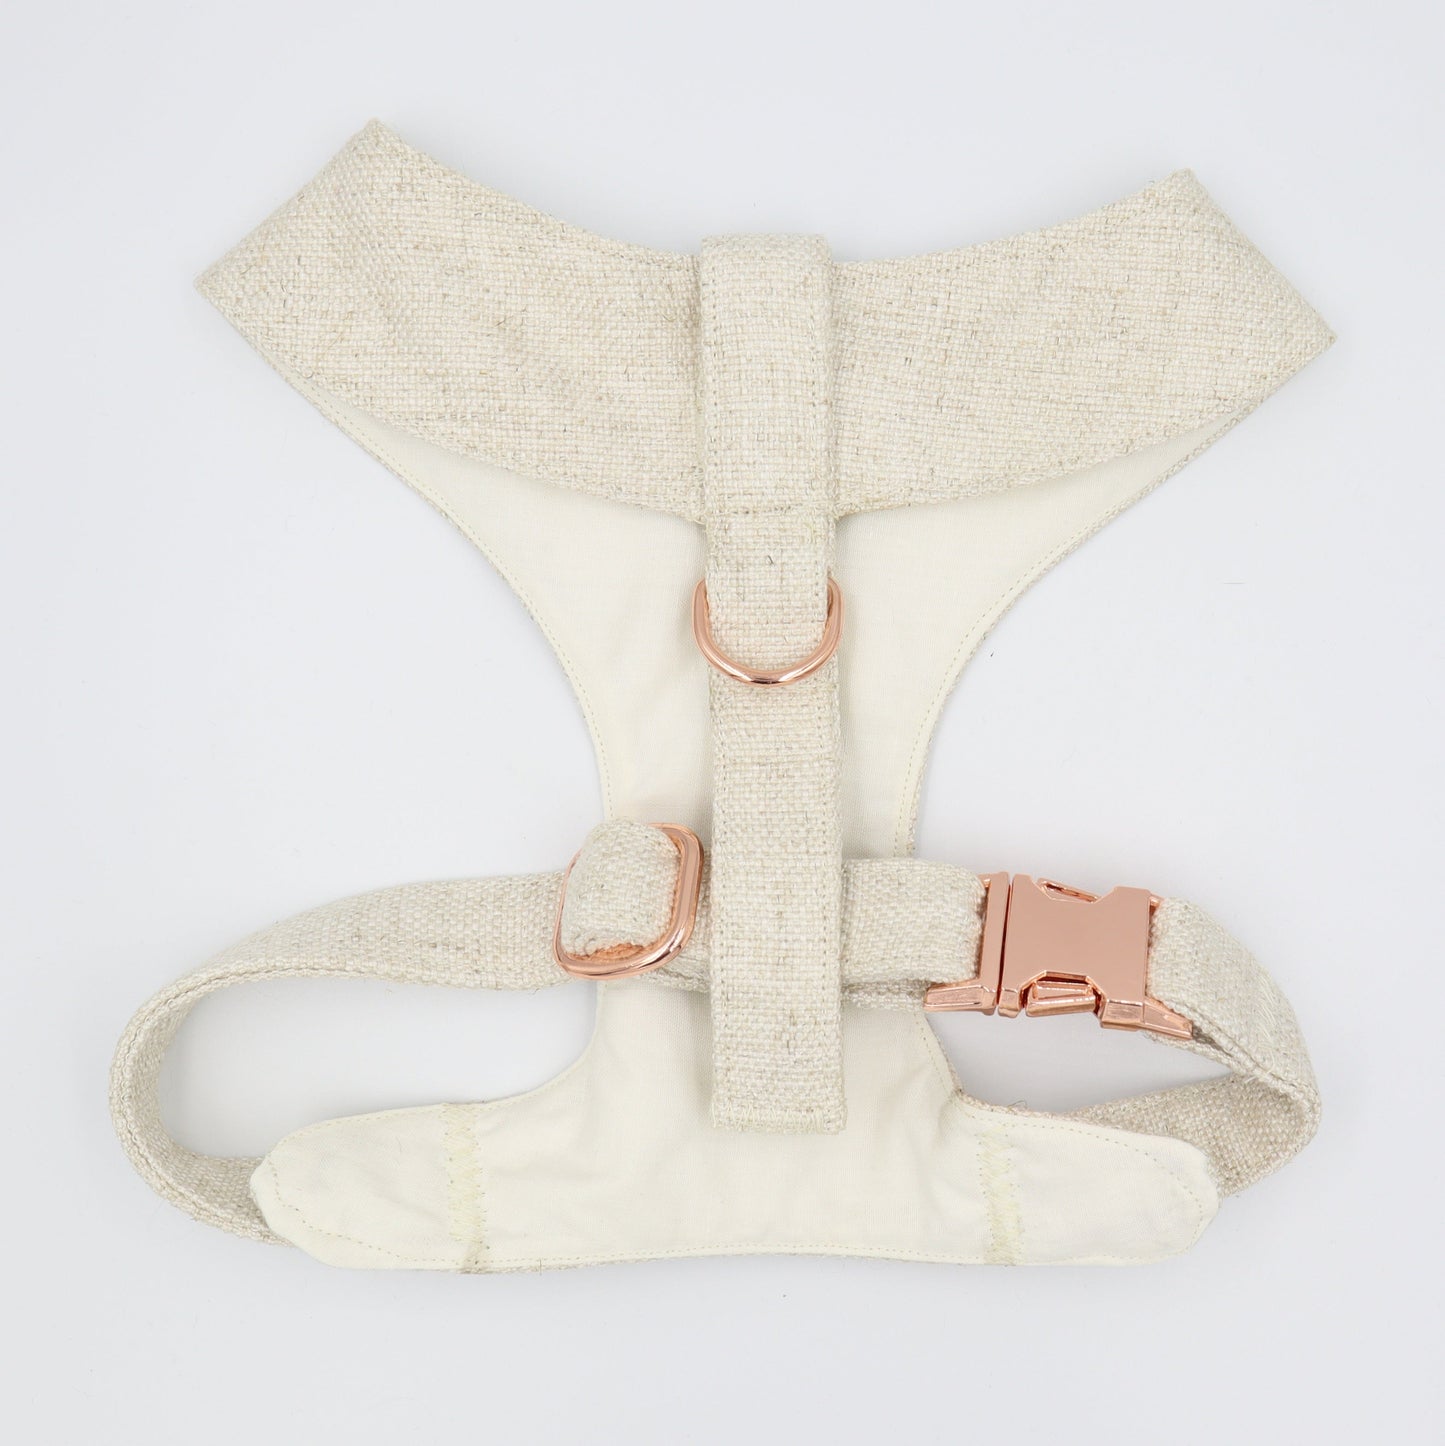 Tuxedo Wedding Dog Harness in Beige Natural Linen Style TEXTURED Fabric with Mauve Satin Bow CHOICE of COLOURS